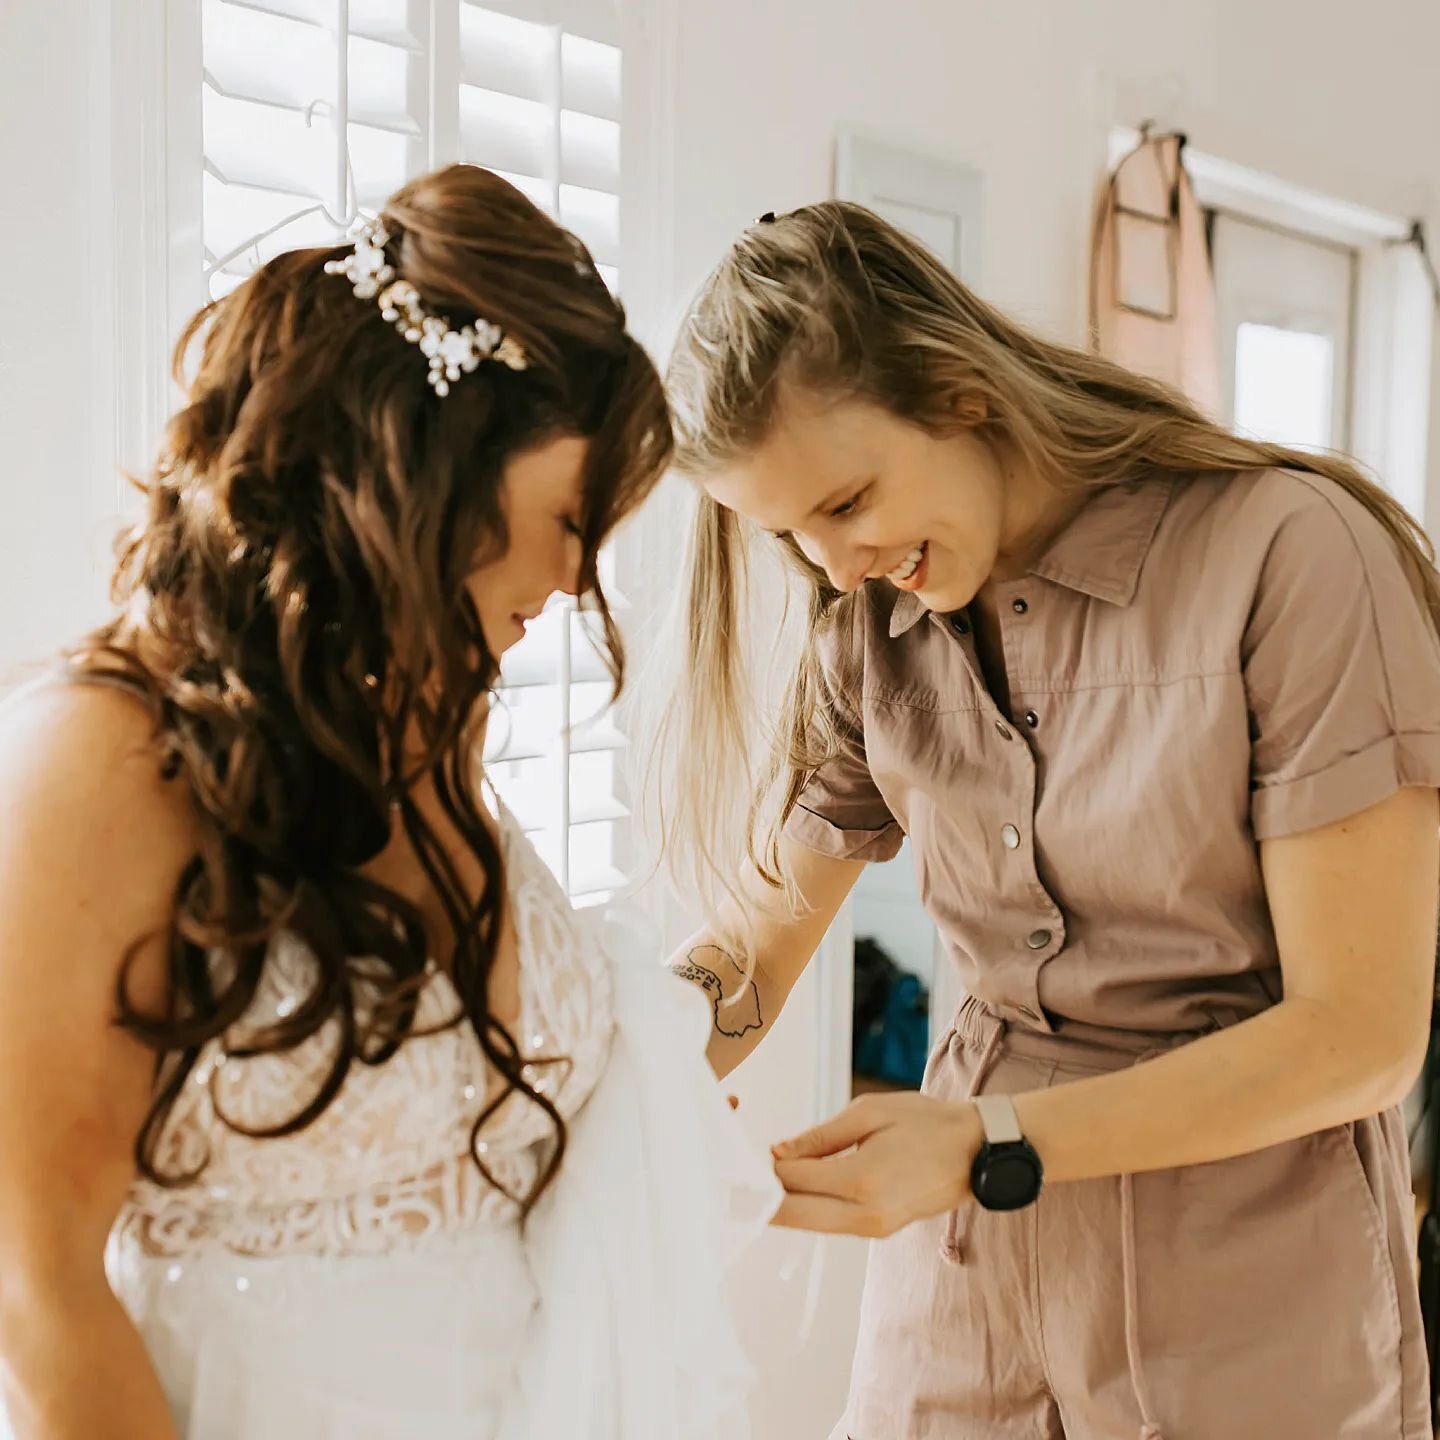 I'm seriously whole heartedly over the moon happy that I got to help turn your wedding day into a story for you and Ben to treasure for eternity 💕 

You, Brooke were a gorgeous bride! 

// I was actually almost five months pregnant here with Lillee 